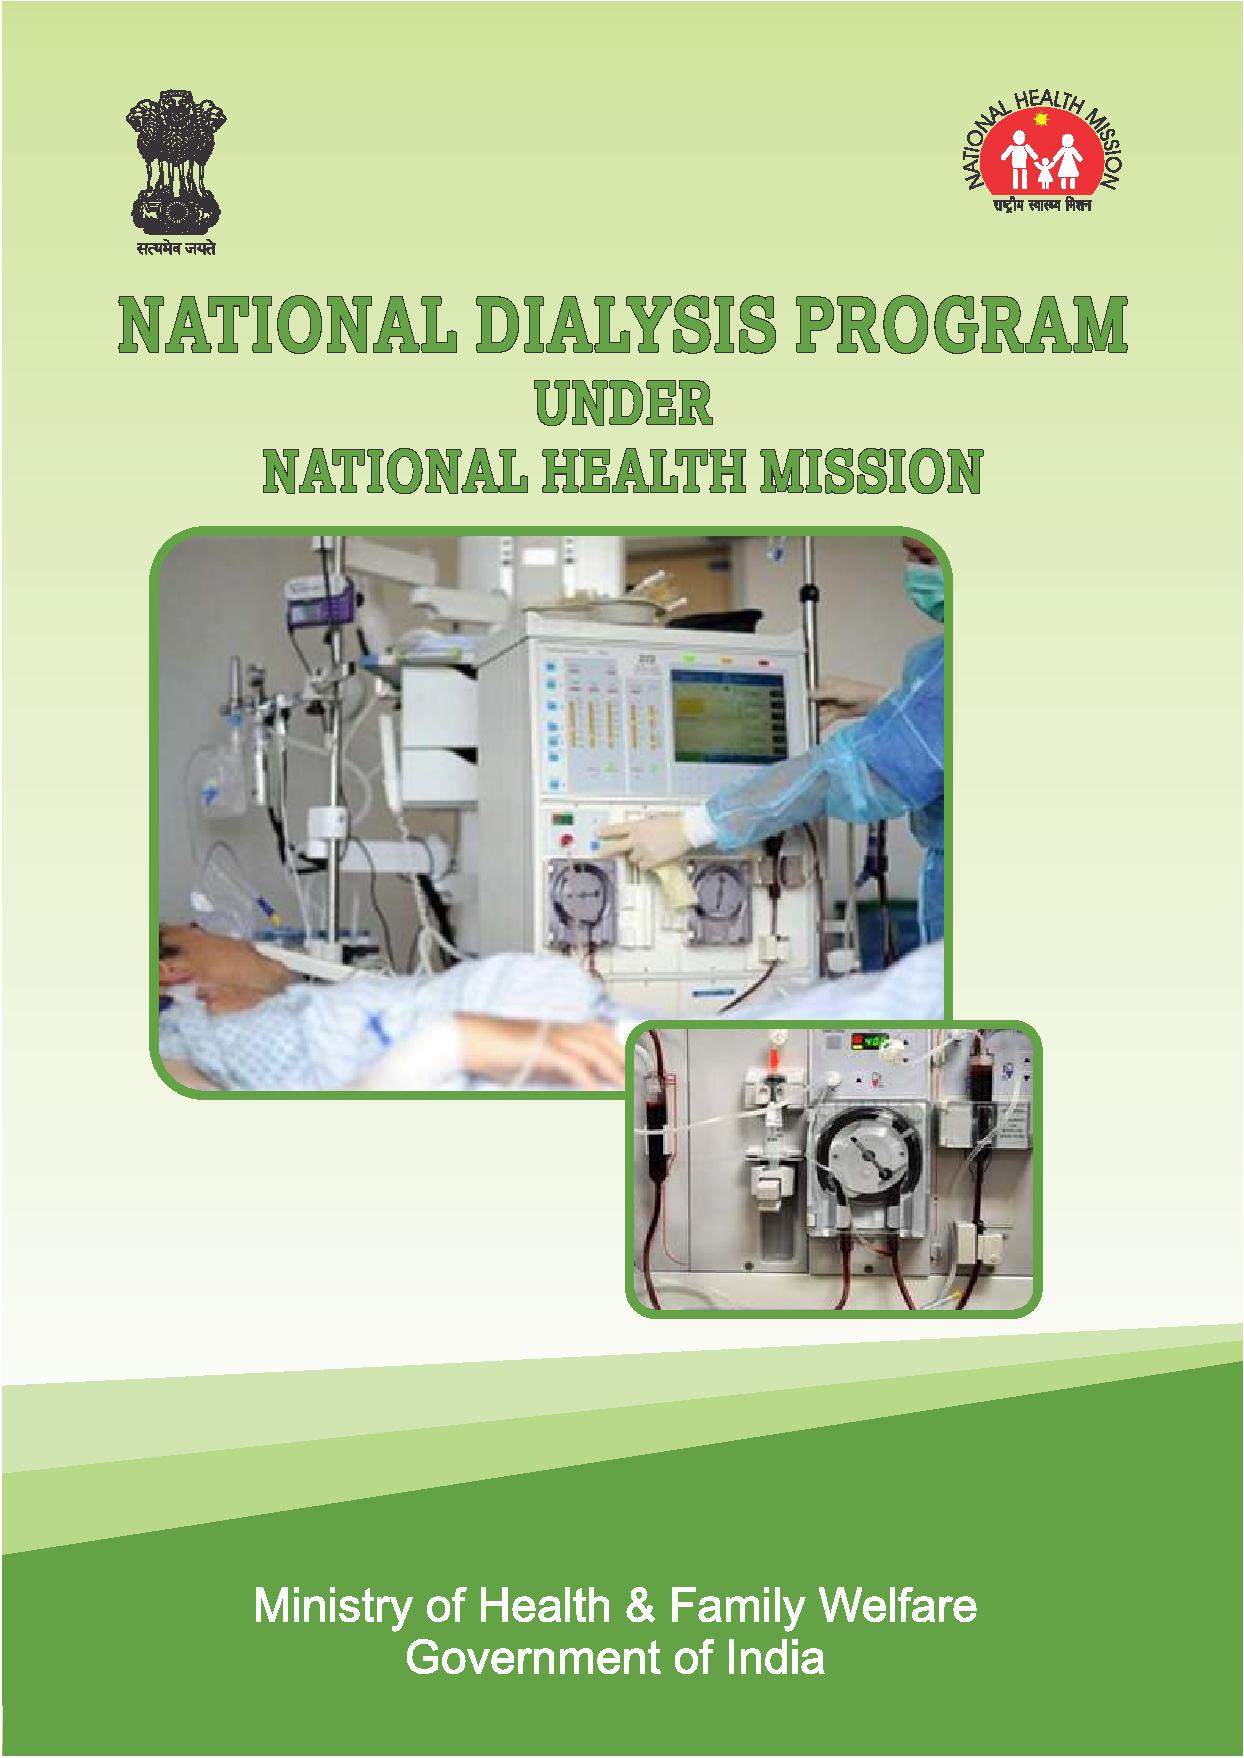 National Dialysis Program under the National Health Mission